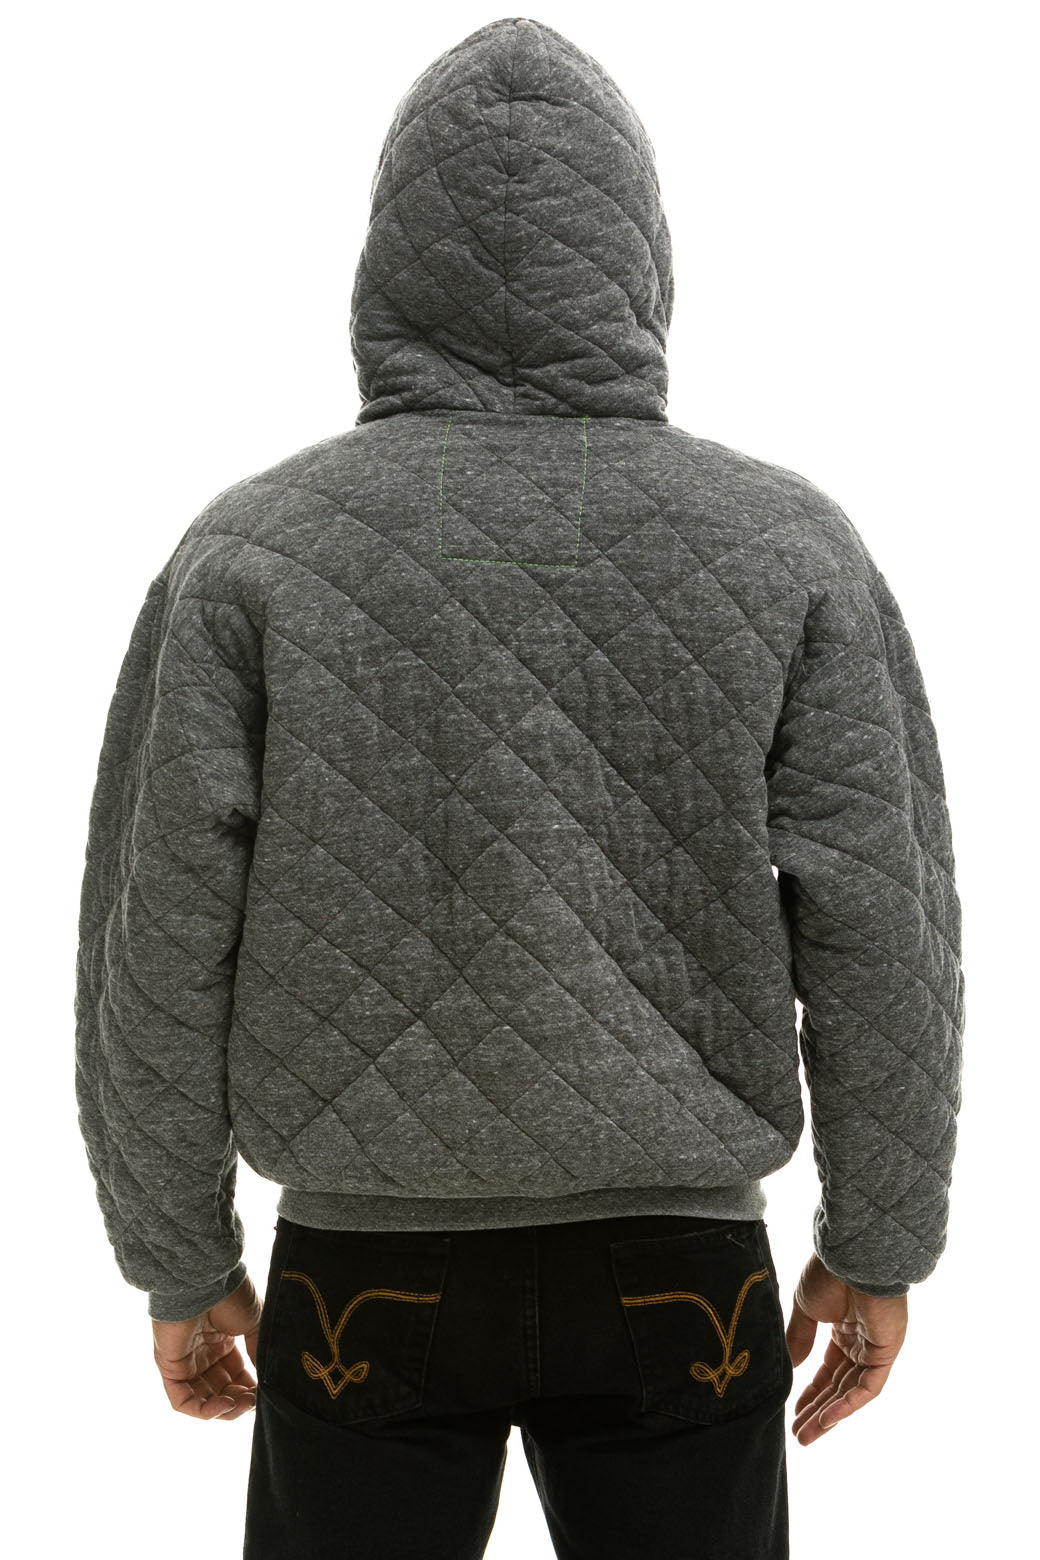 QUILTED ZIP HOODIE RELAXED - HEATHER GREY Hoodie Aviator Nation 